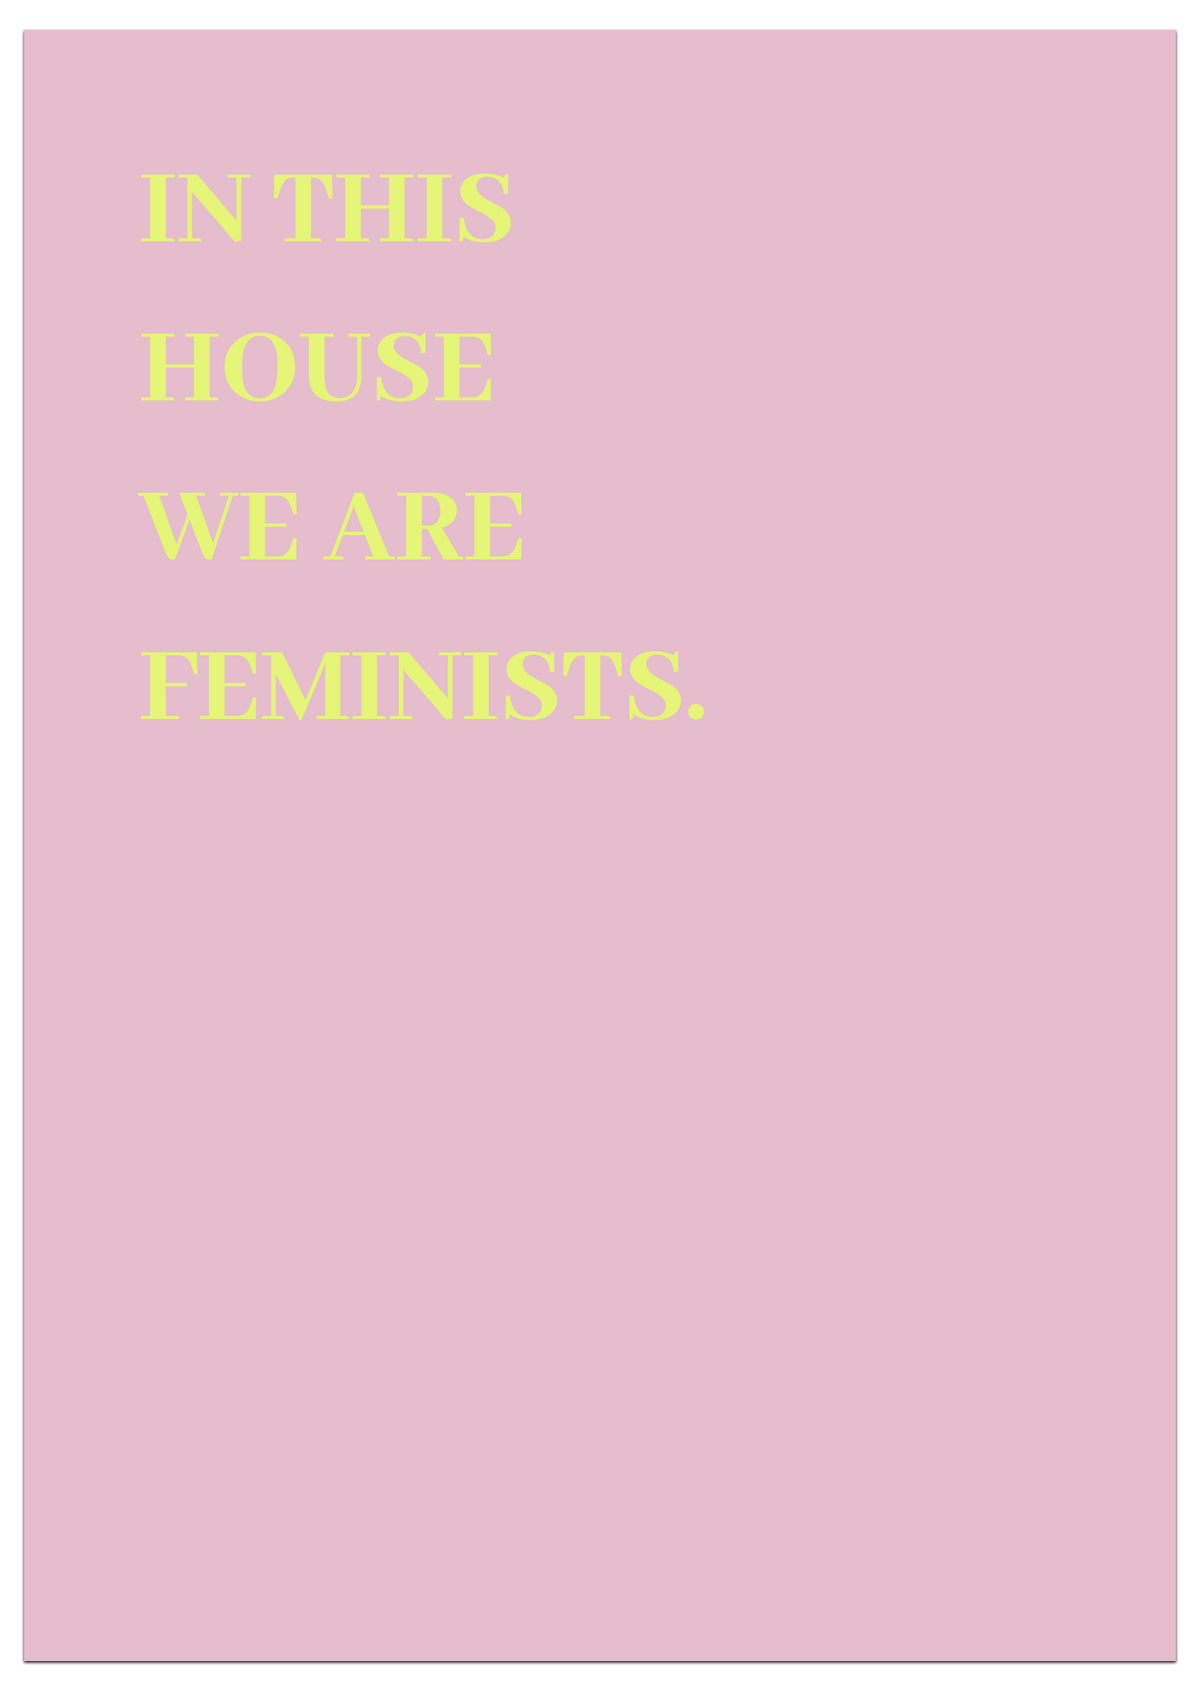 In this House we are Feminists Poster